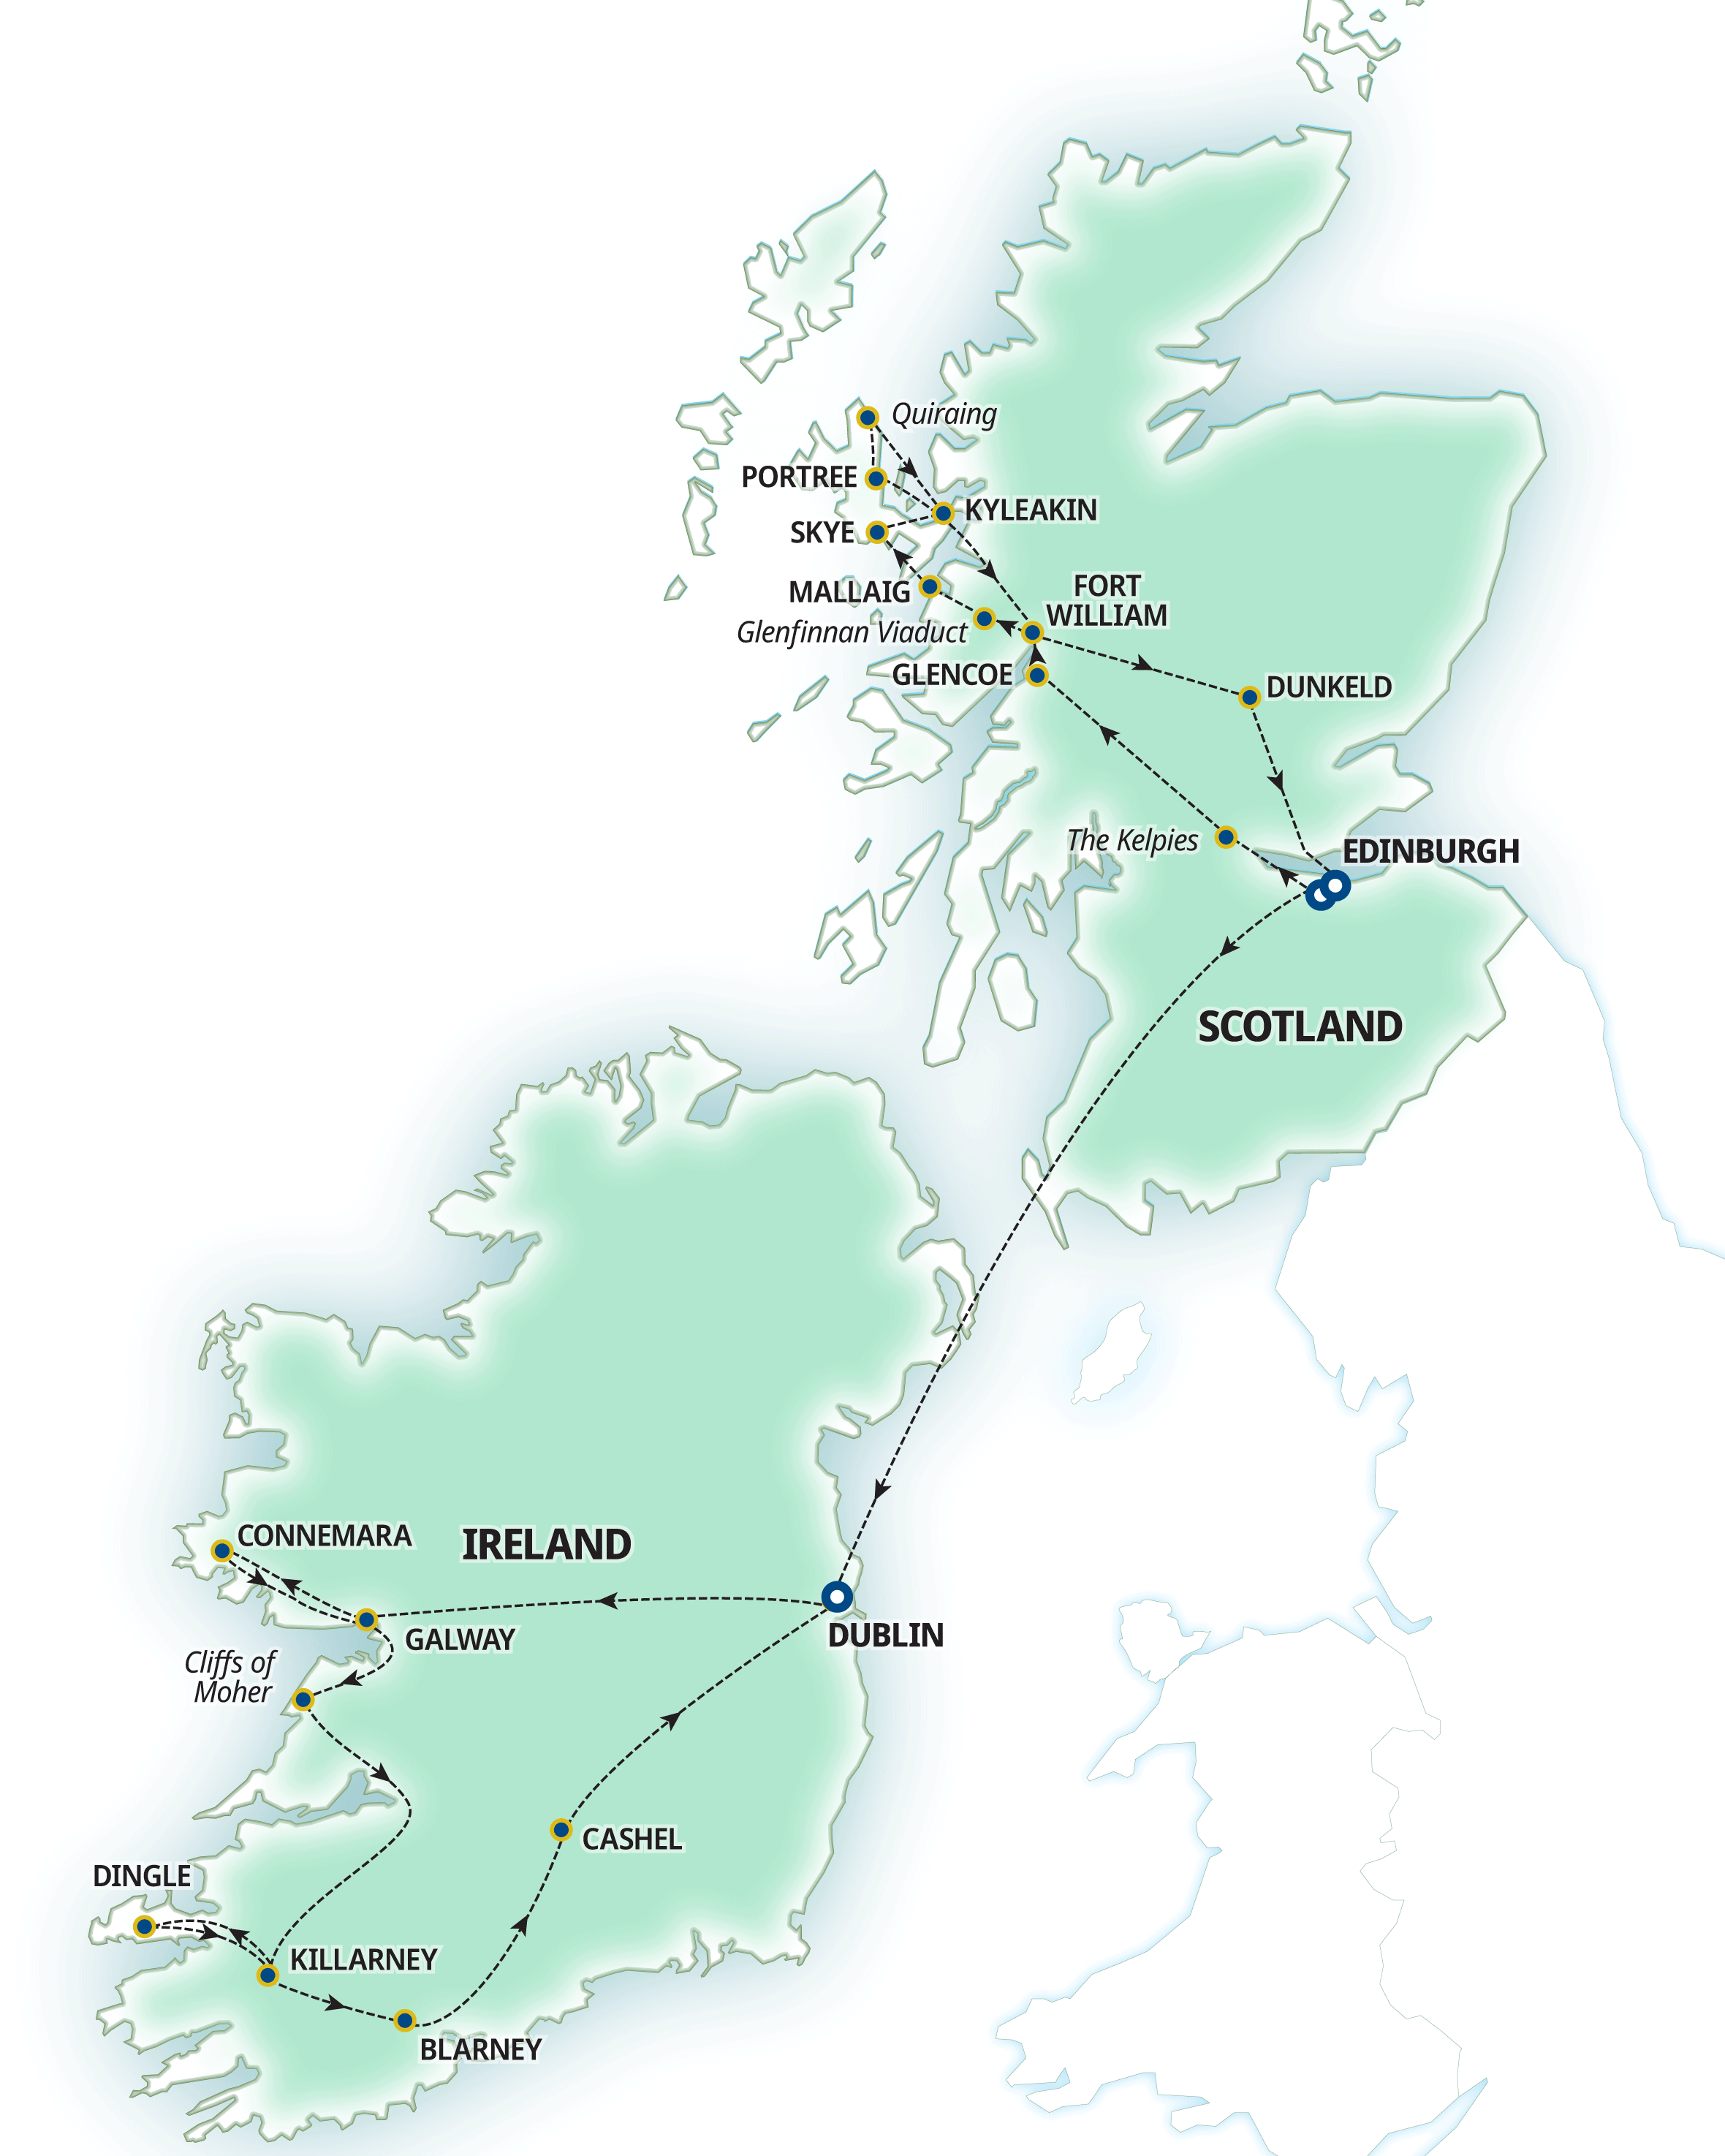 small tours of ireland and scotland